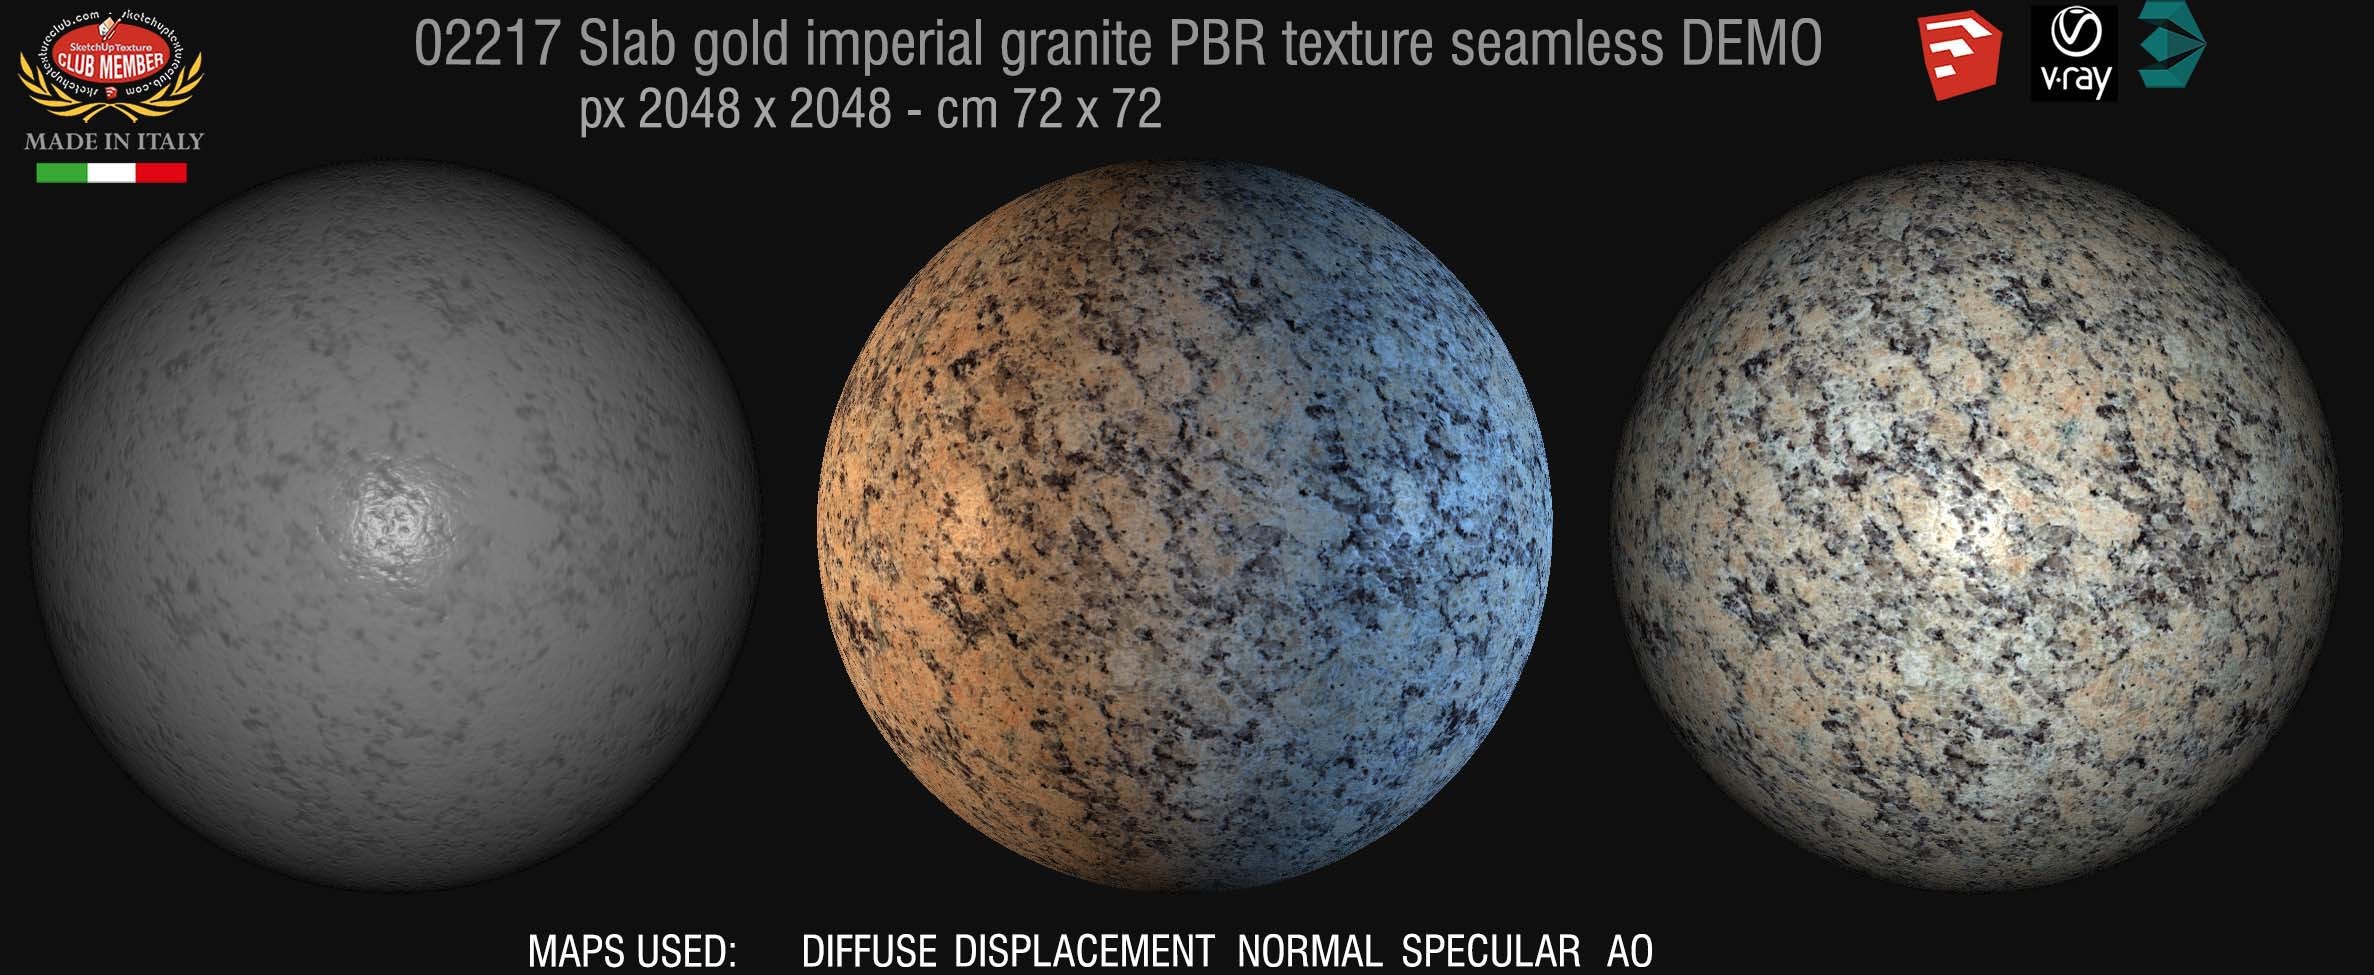 02217 Slab gold imperial granite PBR texture seamless DEMO